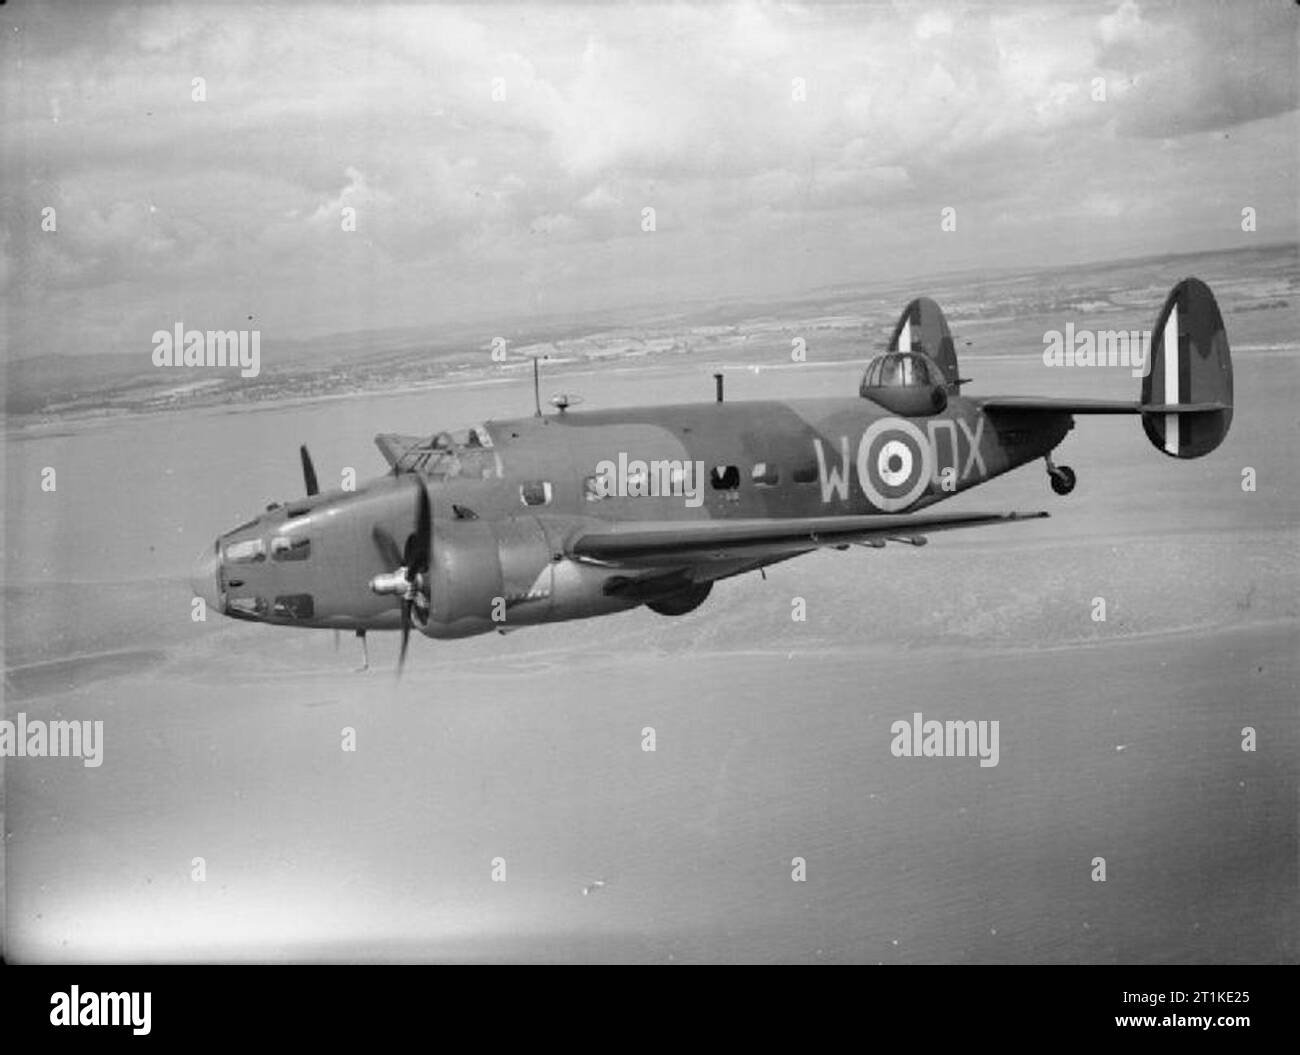 American Aircraft in RAF Service 1939-1945- Lockheed L-214 and L-414 Hudson. Hudson Mark I, T9277 ?QX-W?, of No. 224 Squadron RAF based at Leuchars, Fife, in flight off the Scottish coast. This was a late production Mark I, fitted with Hydromatic propellers and early ASV Mark 1 radar. T9277 went missing while on a patrol off Norway on 9 December 1940. Stock Photo